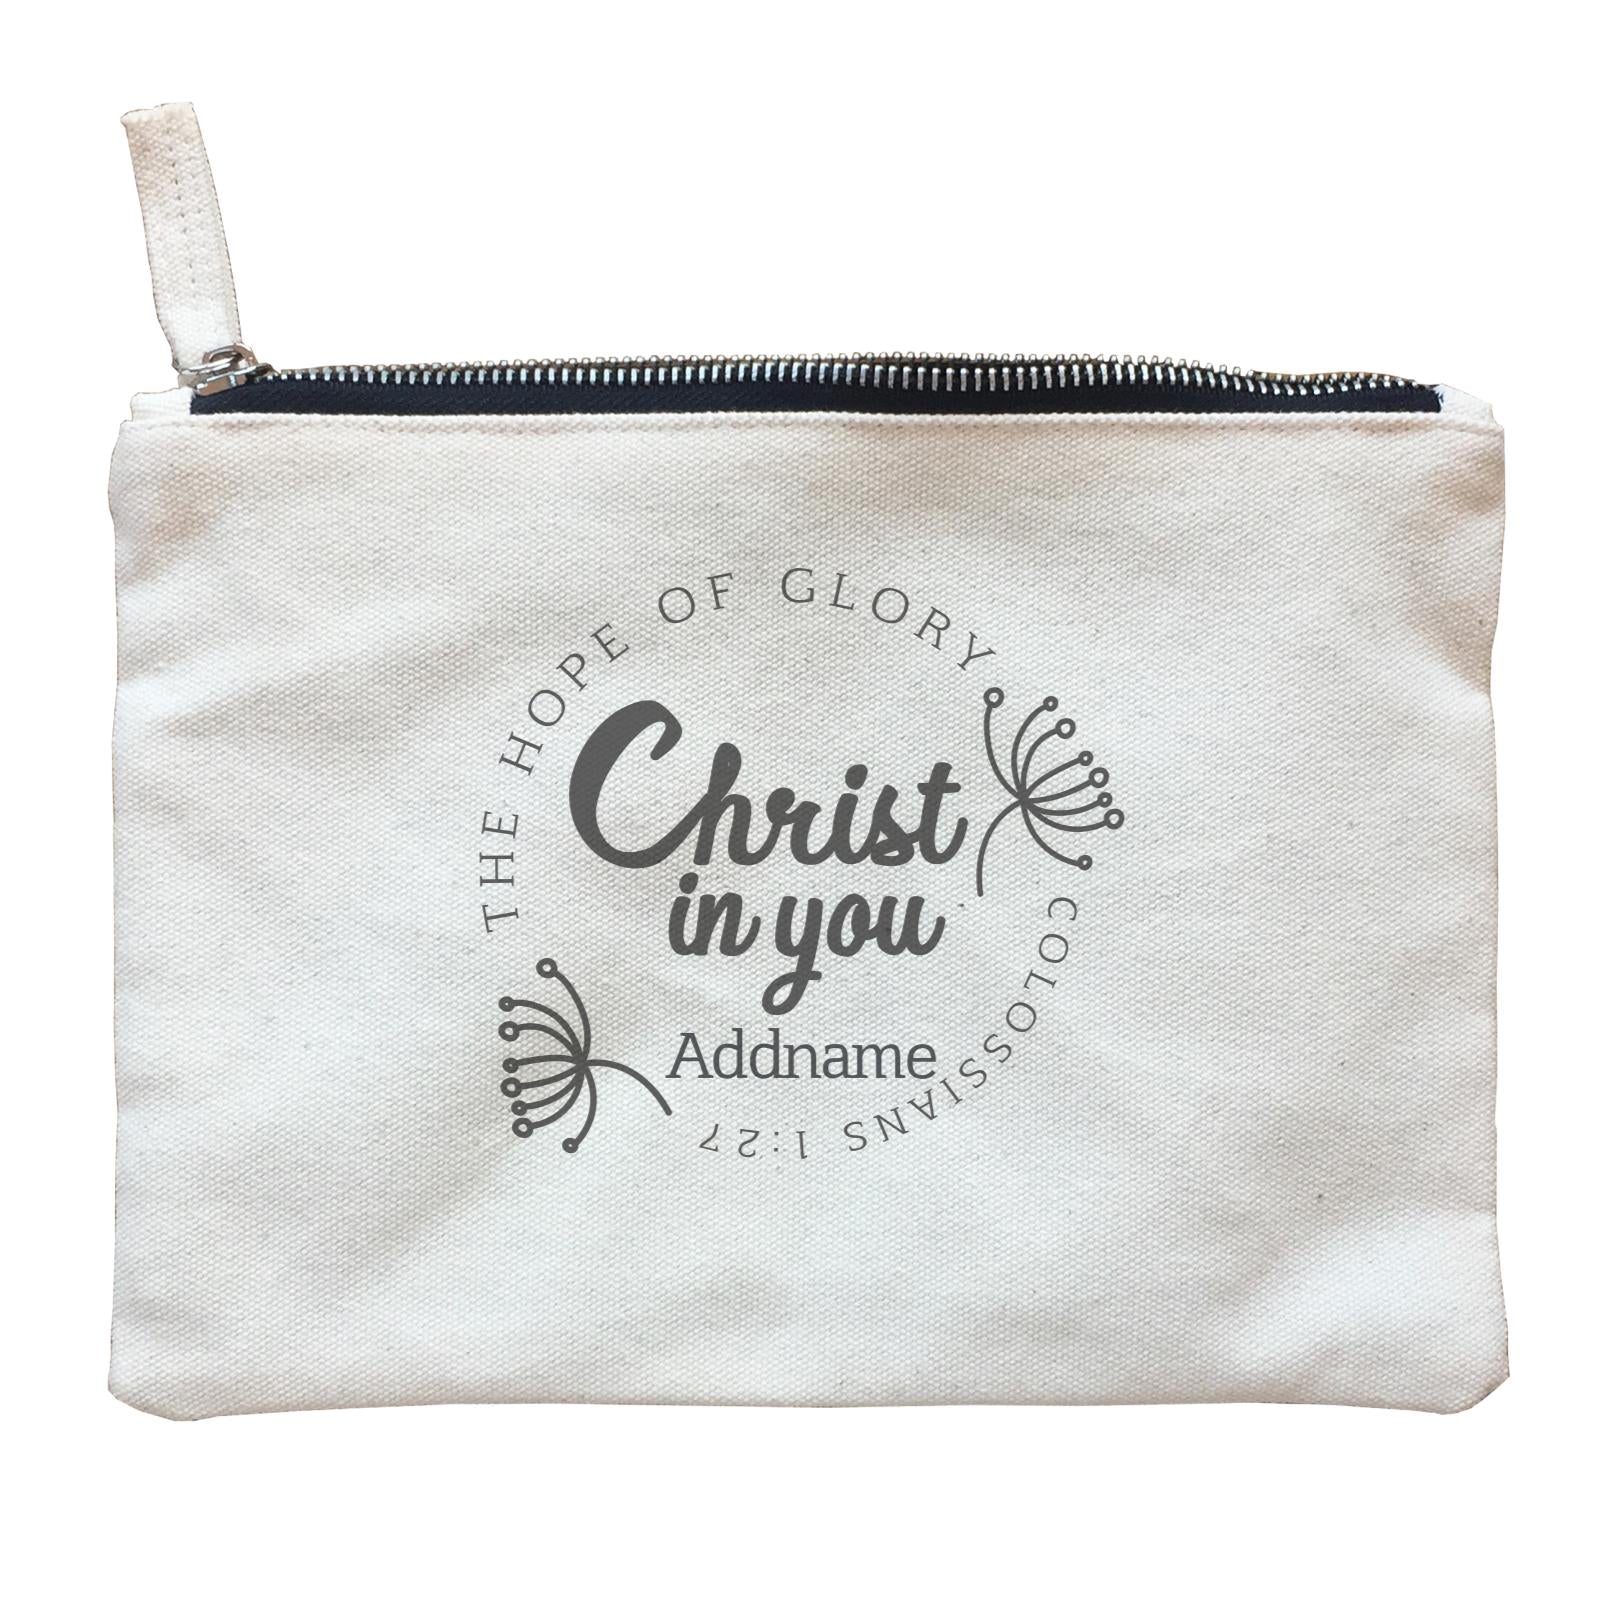 Christian Series The Hope Of Glory Christ In You Colossians 1.27 Addname Zipper Pouch